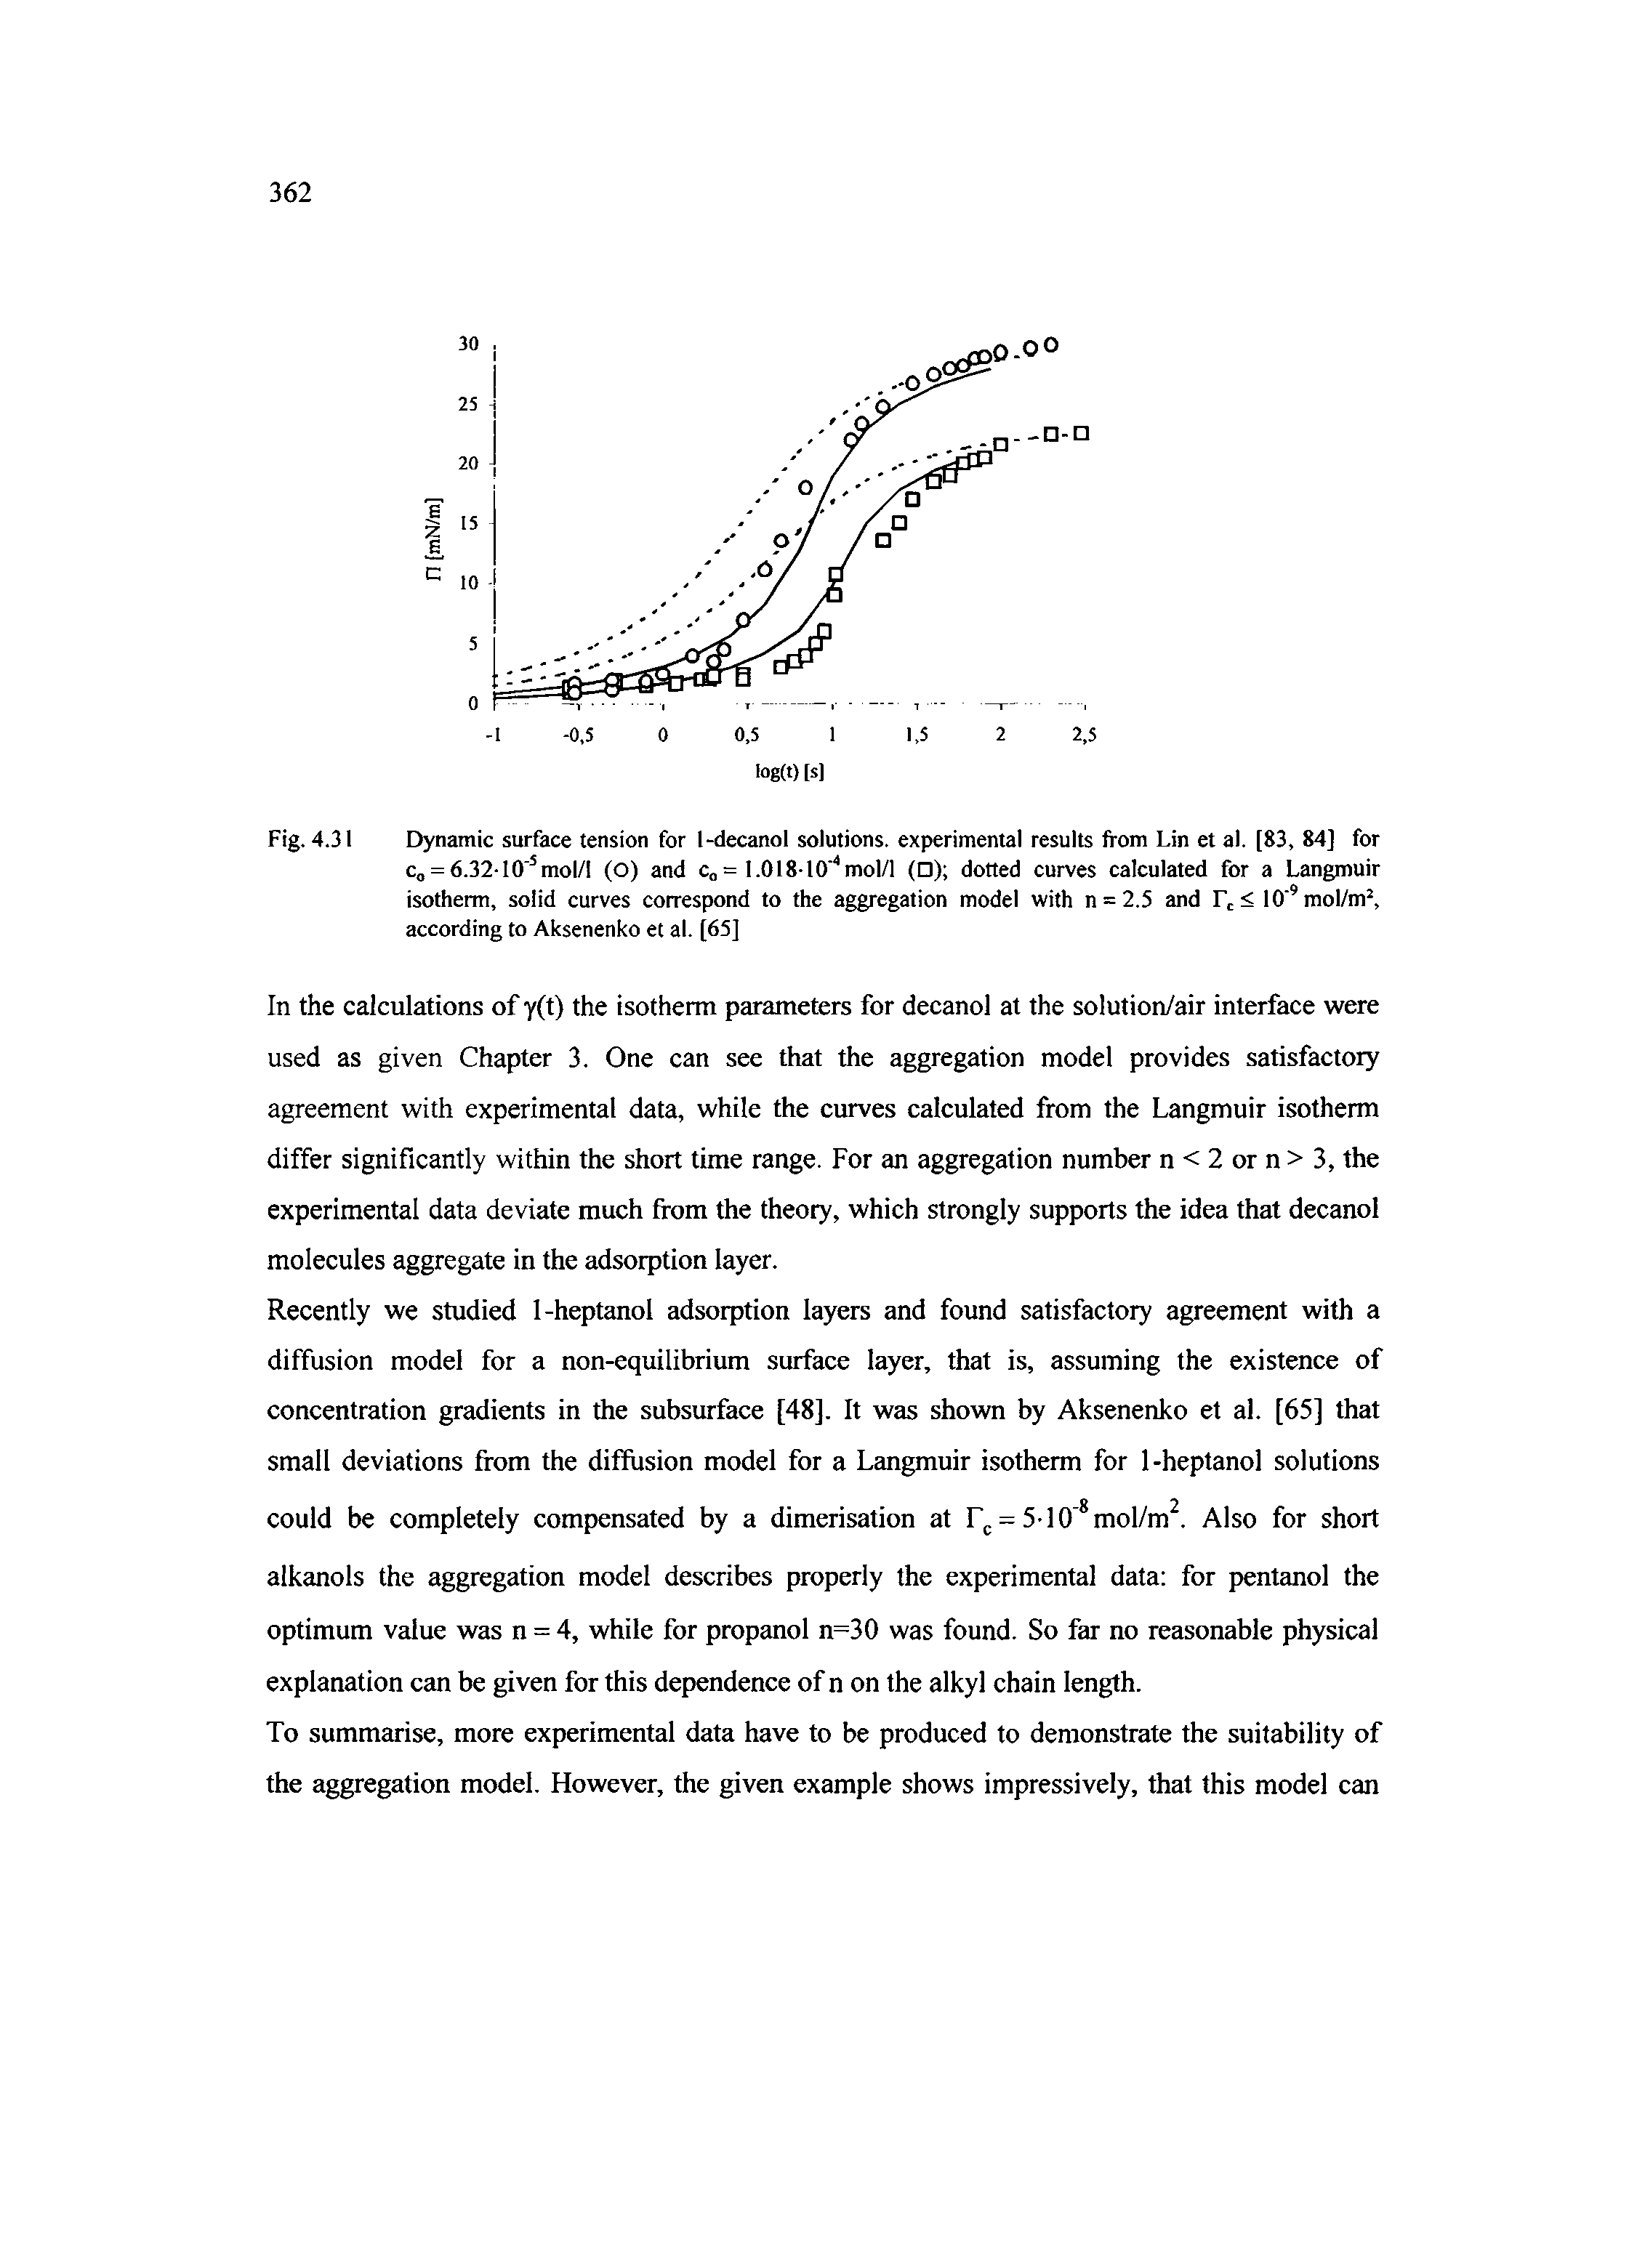 Fig. 4.31 Dynamic surface tension for 1-decanol solutions, experimental results from Lin et al. [83, 84] for c = 6.3210 mol/1 (O) and c = 1.01810 mol/1 (O) dotted curves calculated for a Langmuir isotherm, solid curves correspond to the aggregation model with n = 2.5 and Fc< lO mol/m, according to Aksenenko et al. [65]...